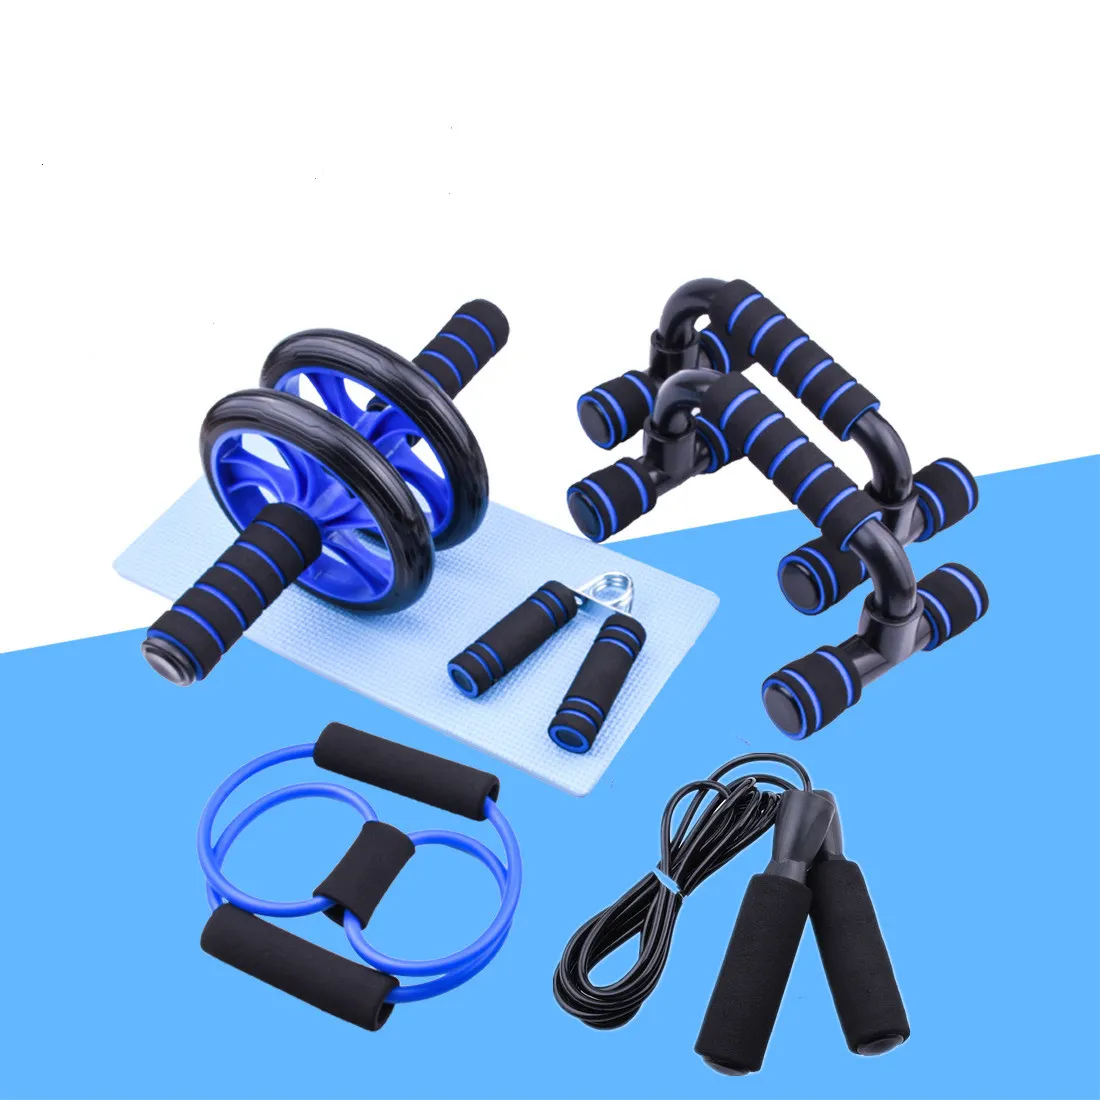 Kit <span class=keywords><strong>Fitness</strong></span> cinque Set di <span class=keywords><strong>attrezzature</strong></span> allenamento Set di <span class=keywords><strong>ruote</strong></span> addominali ruota per esercizi <span class=keywords><strong>attrezzature</strong></span> per palestra <span class=keywords><strong>Fitness</strong></span> ruota 5 in 1 Ab